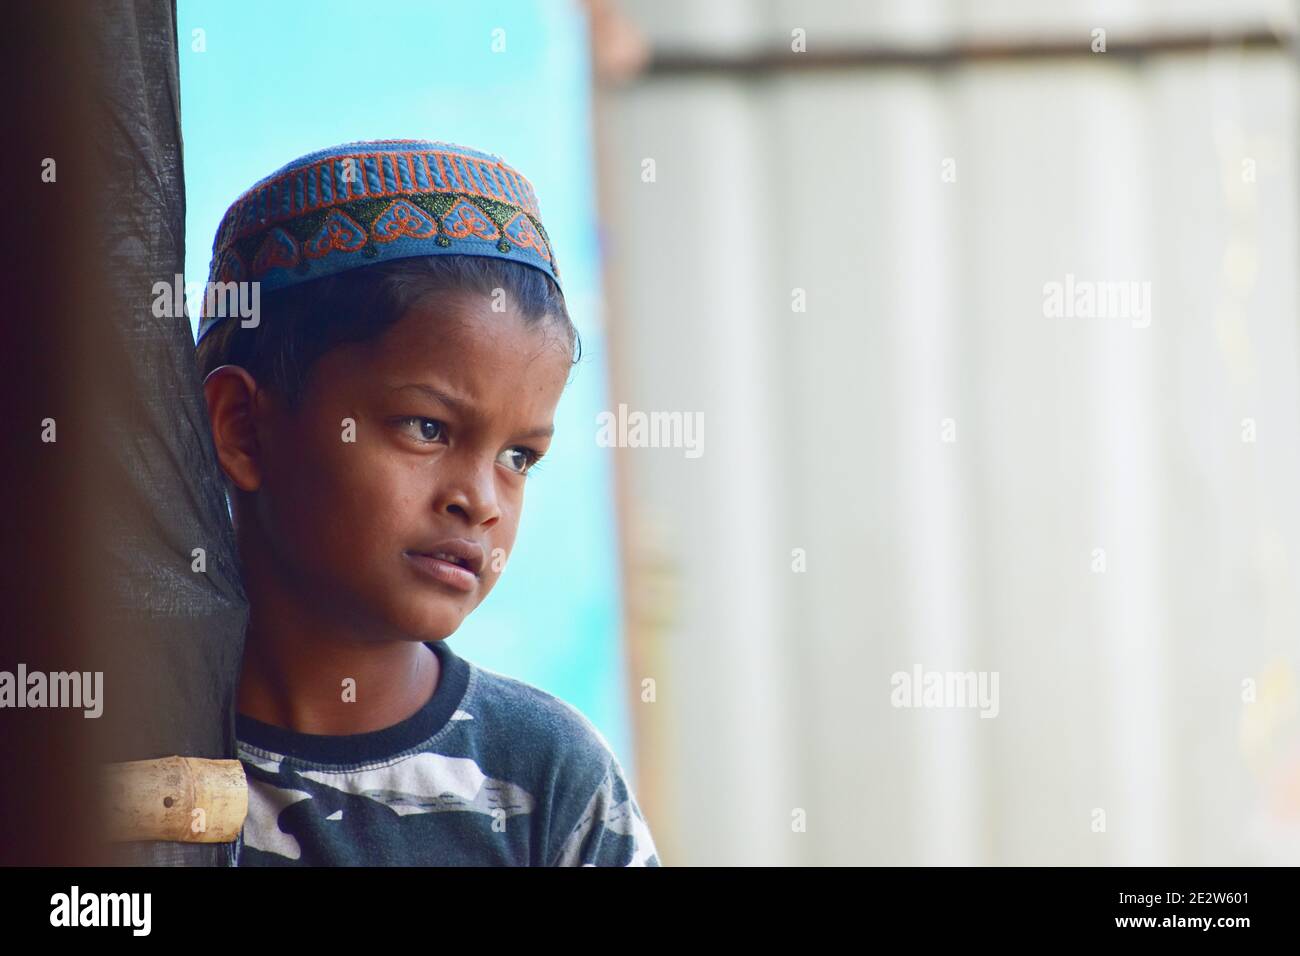 Hyderabad, India - March 05, 2020:  A young Rohingya 7 year old child stands alone at the side of the Rohingya refugee camp at Balappur, Hafiz Baba Na Stock Photo